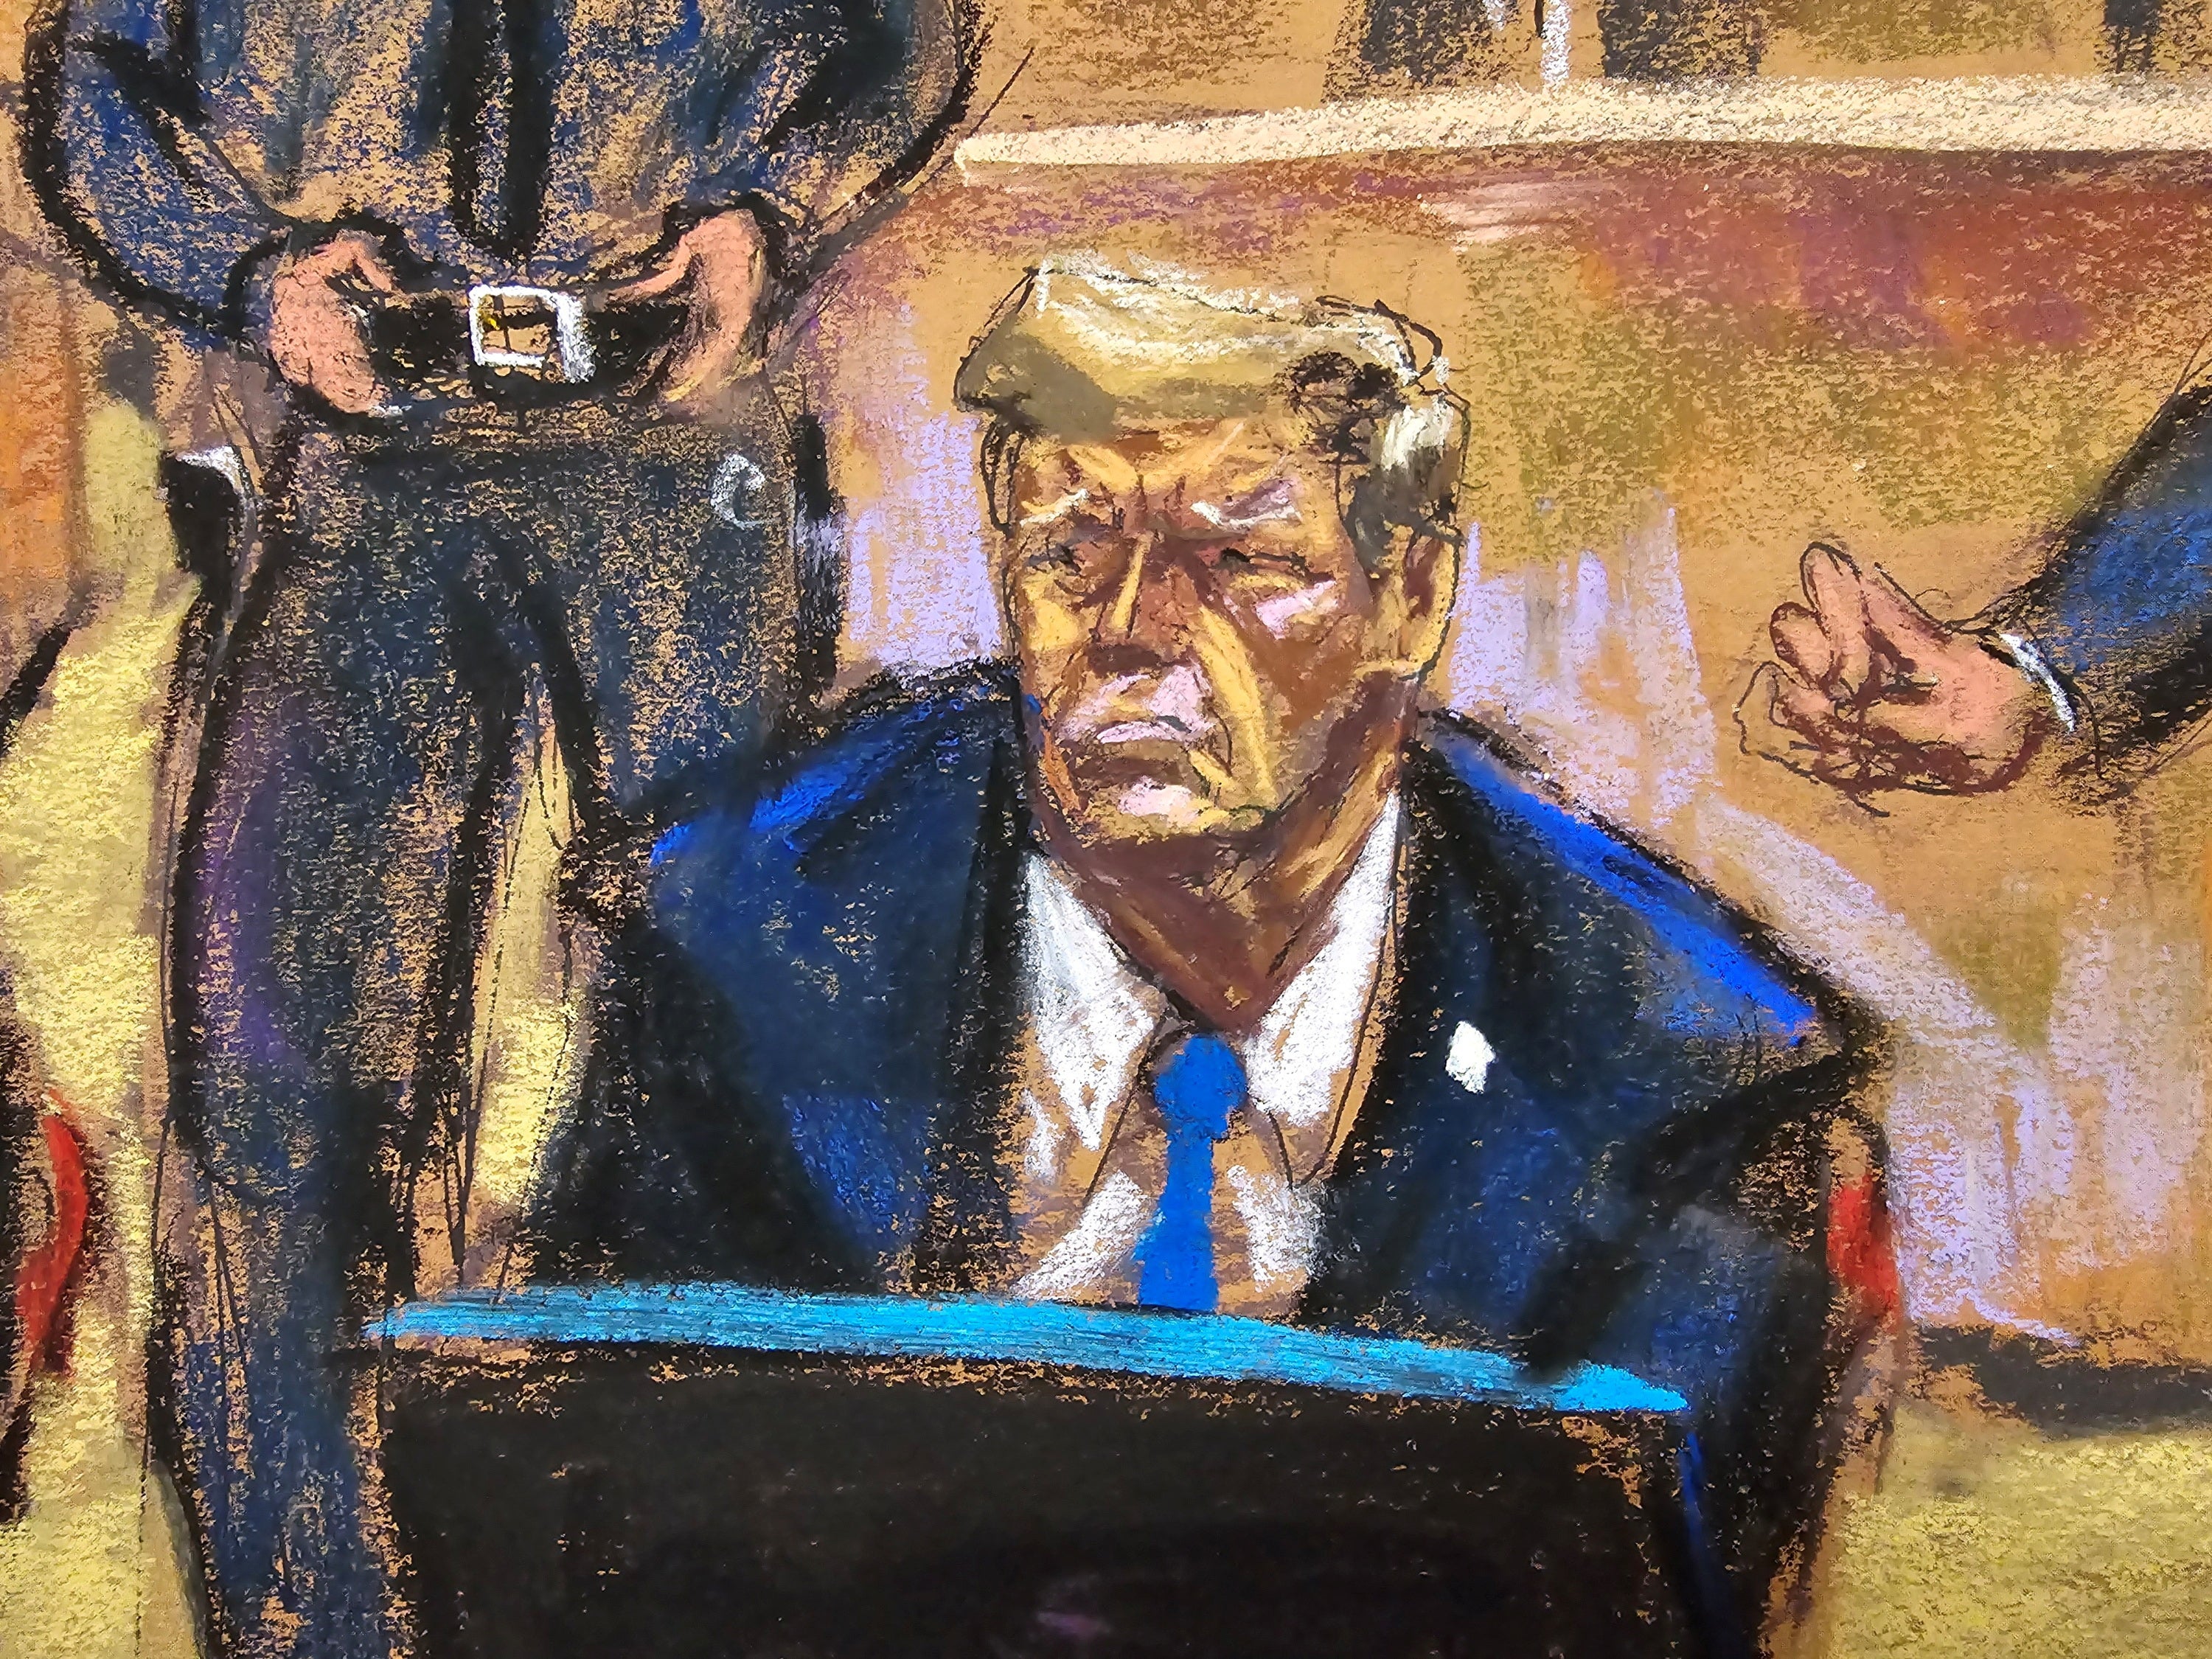 A court sketch shows Trump sitting in the courtroom. He was forced to listen to a wide range of opinions about him, many negative